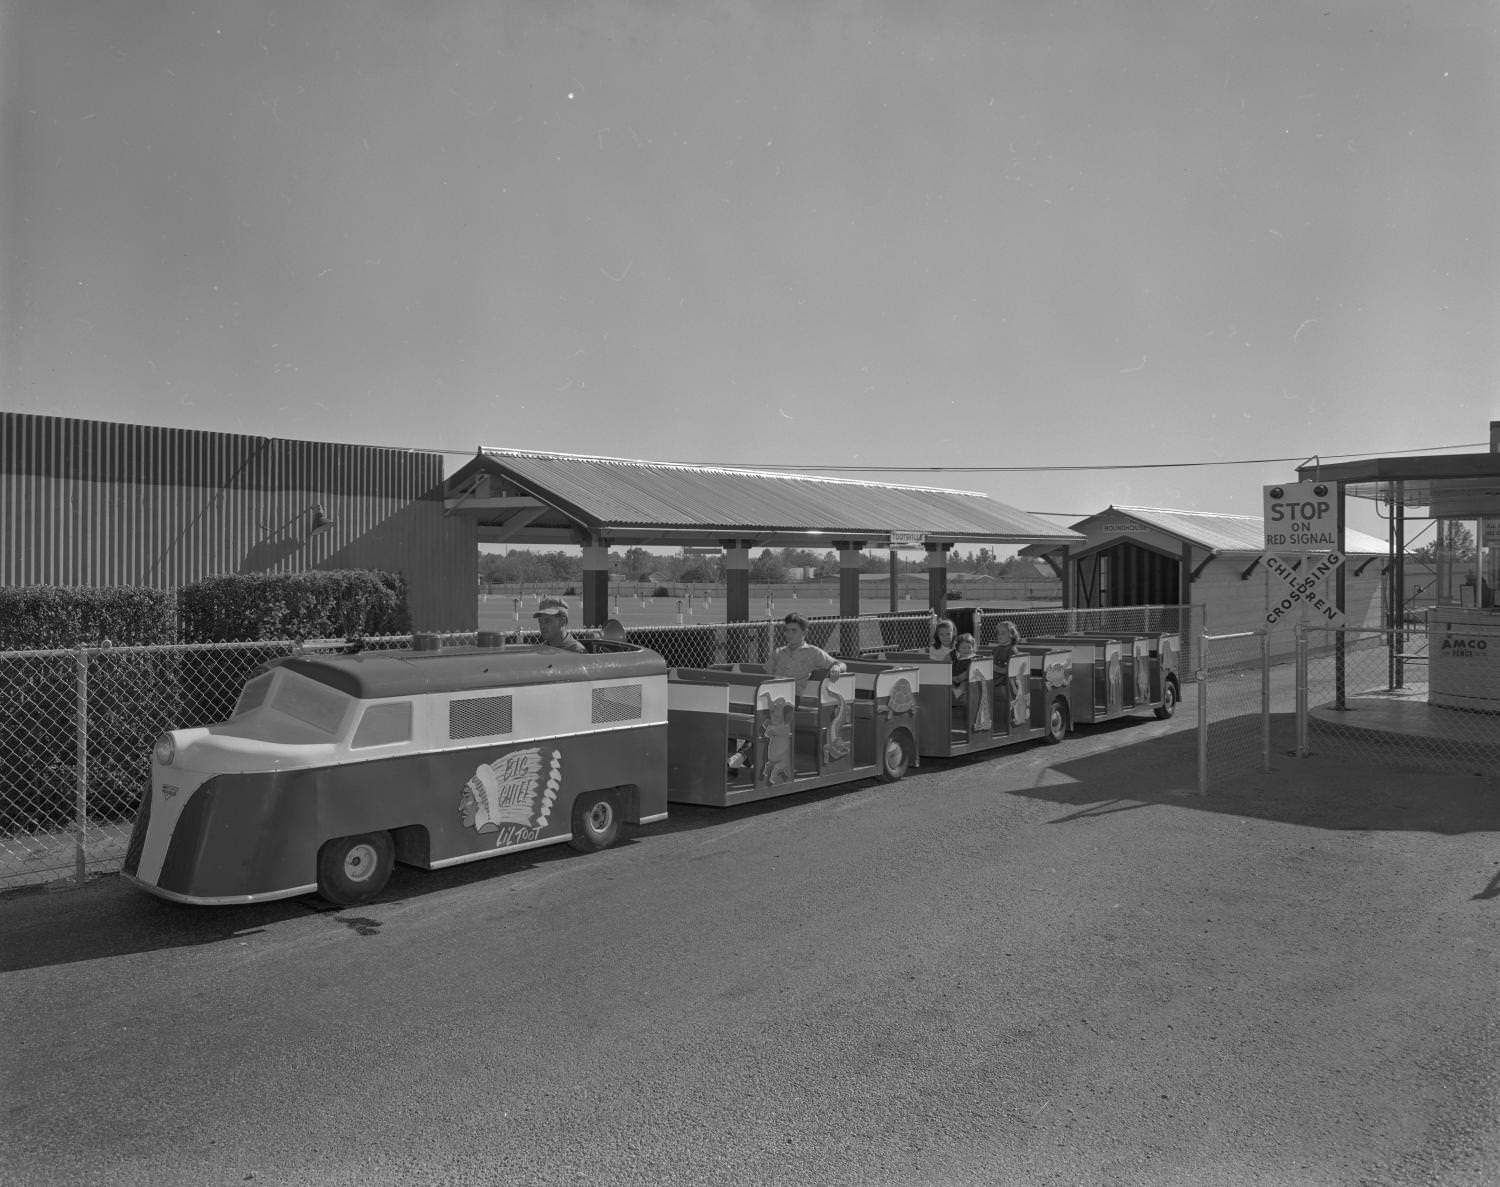 A mini train for children at theater located at 5601 North Lamar Boulevard, 1961